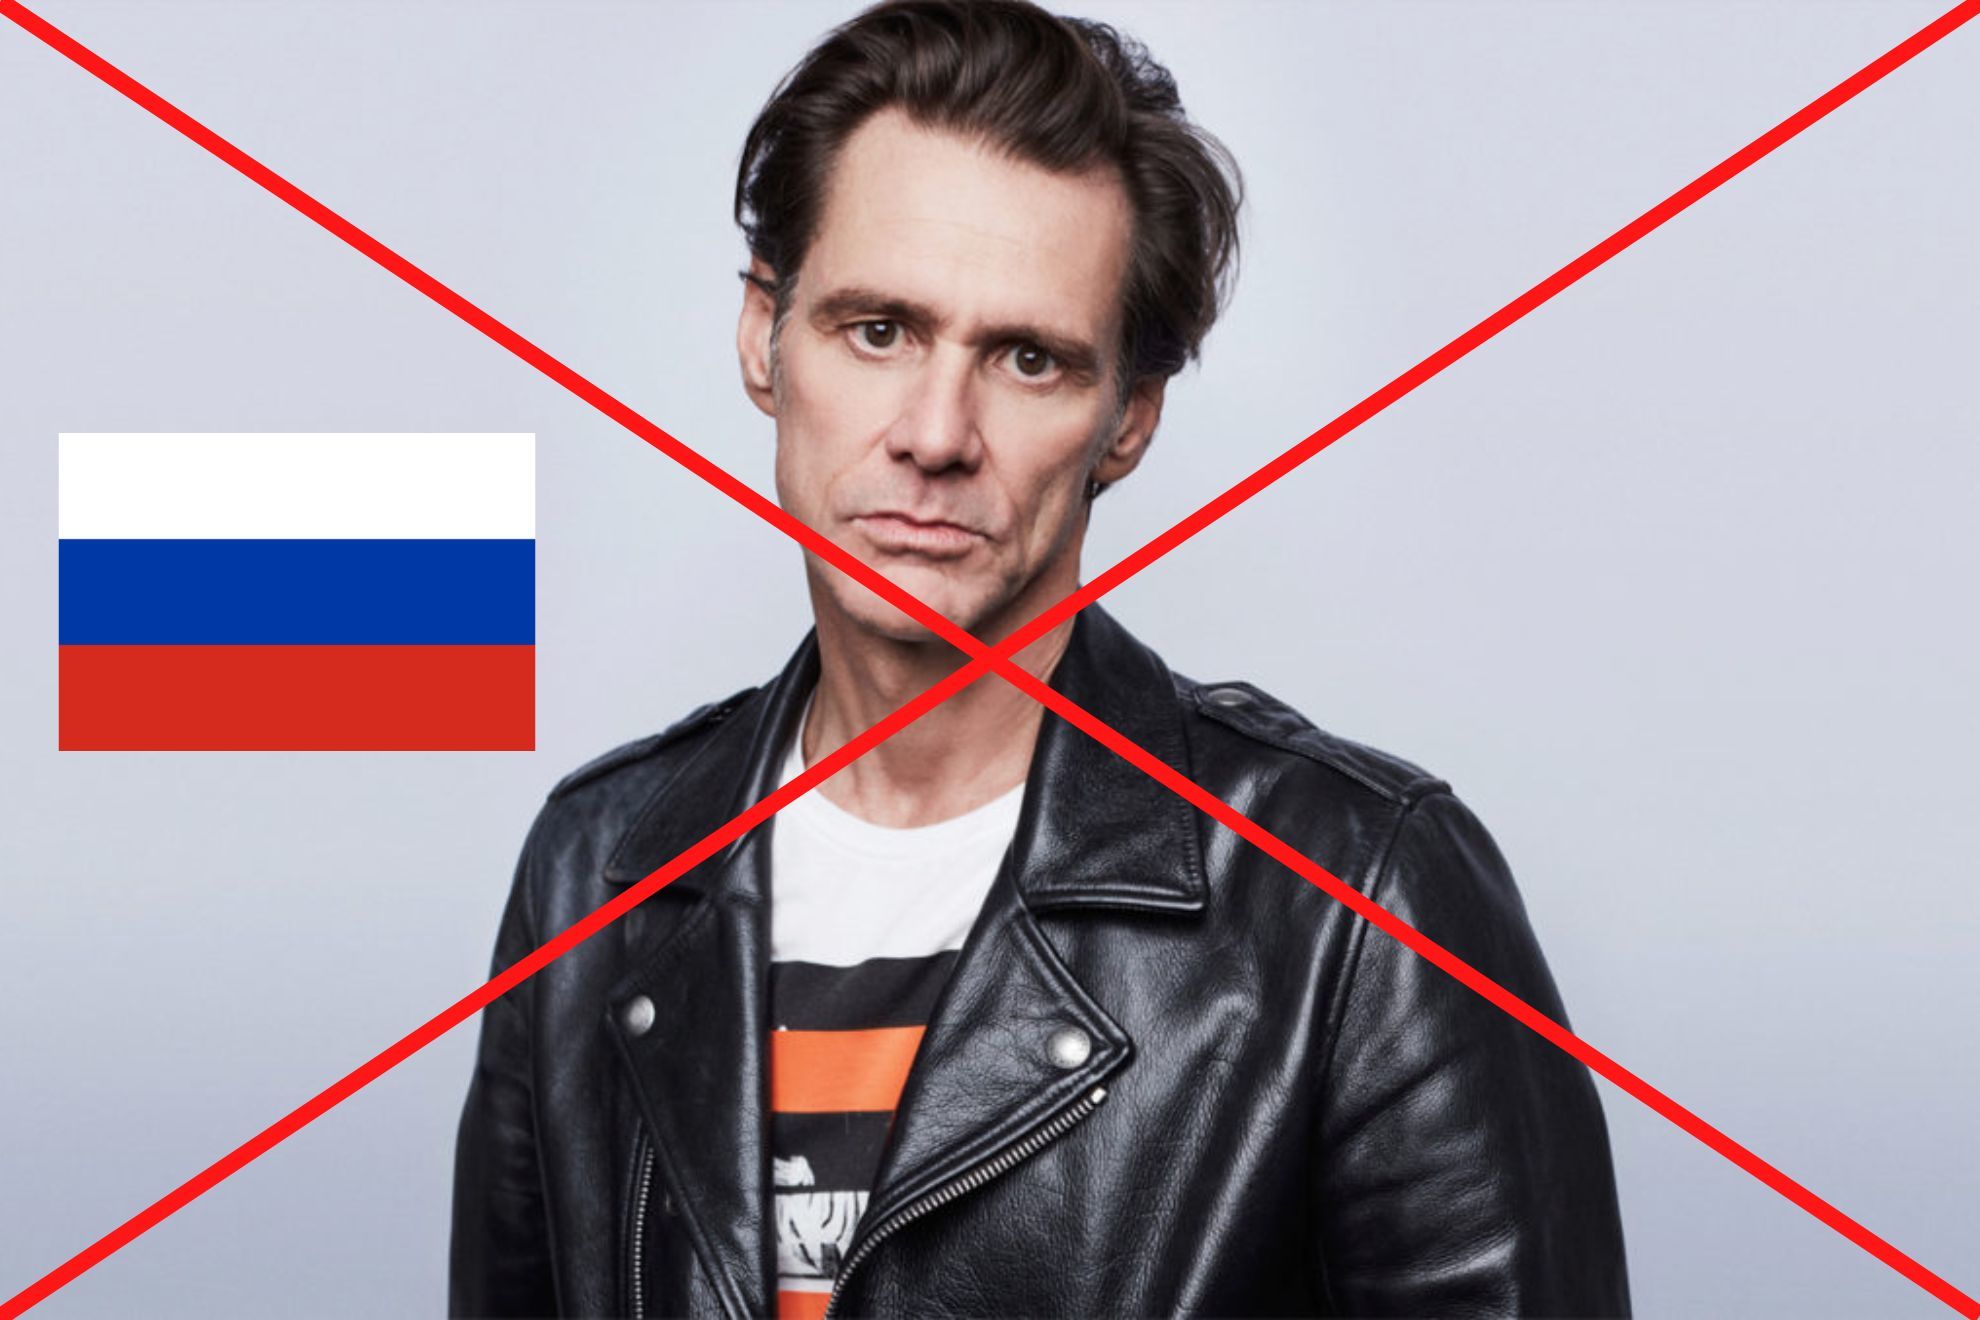 Russia bans Jim Carrey from entering the country